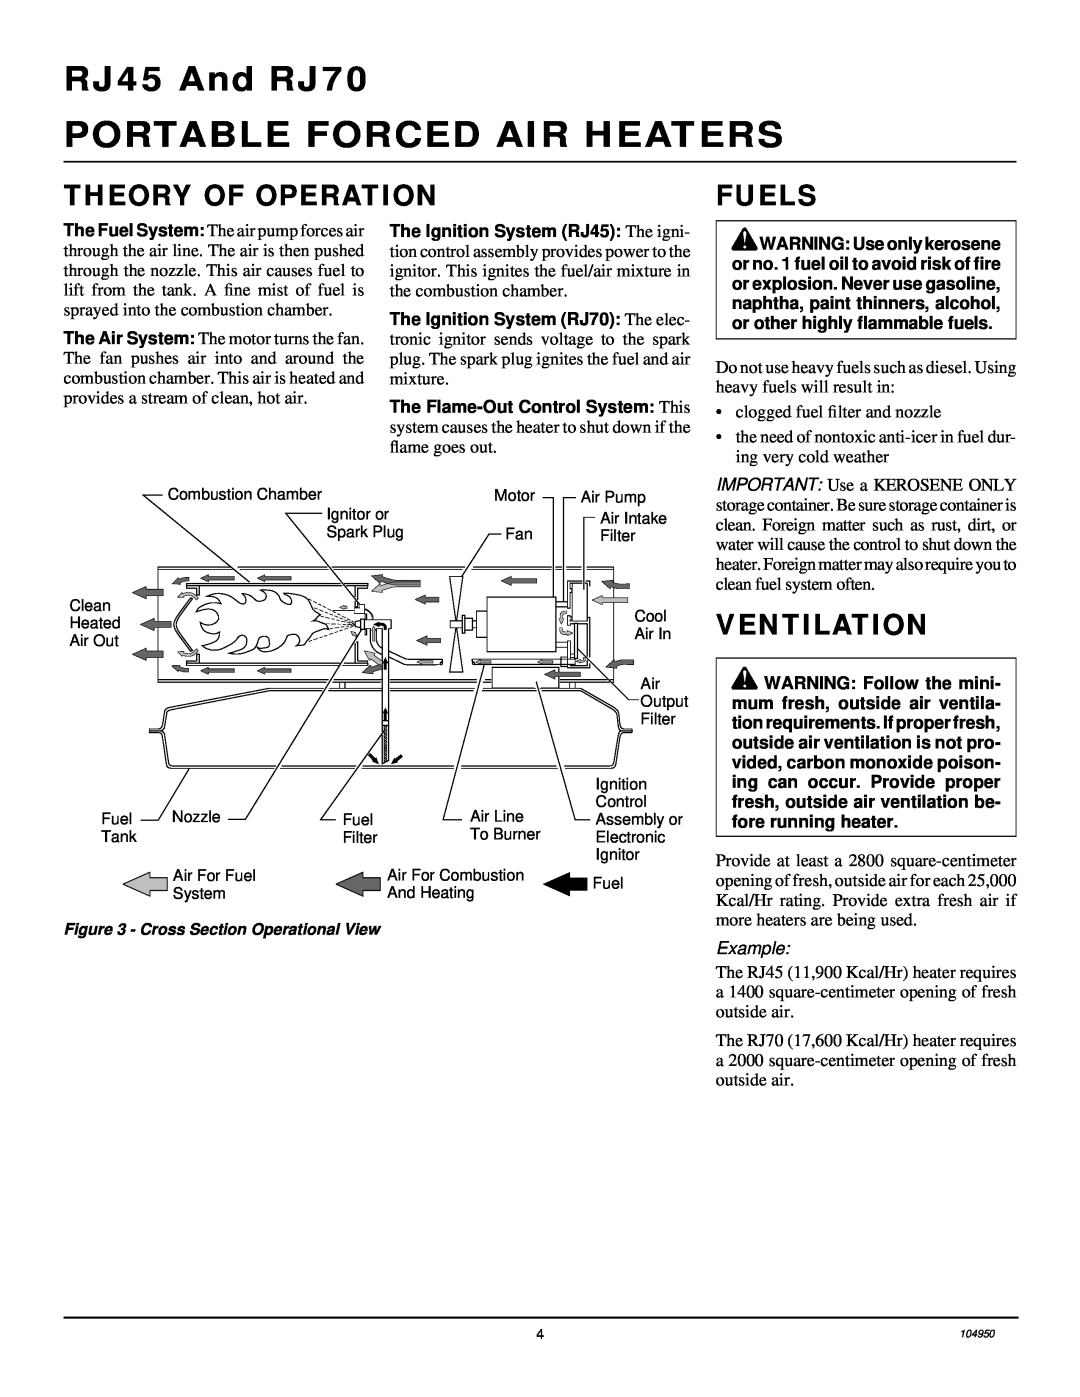 Desa owner manual Theory Of Operation, Fuels, Ventilation, Portable Forced Air Heaters, RJ45 And RJ70 